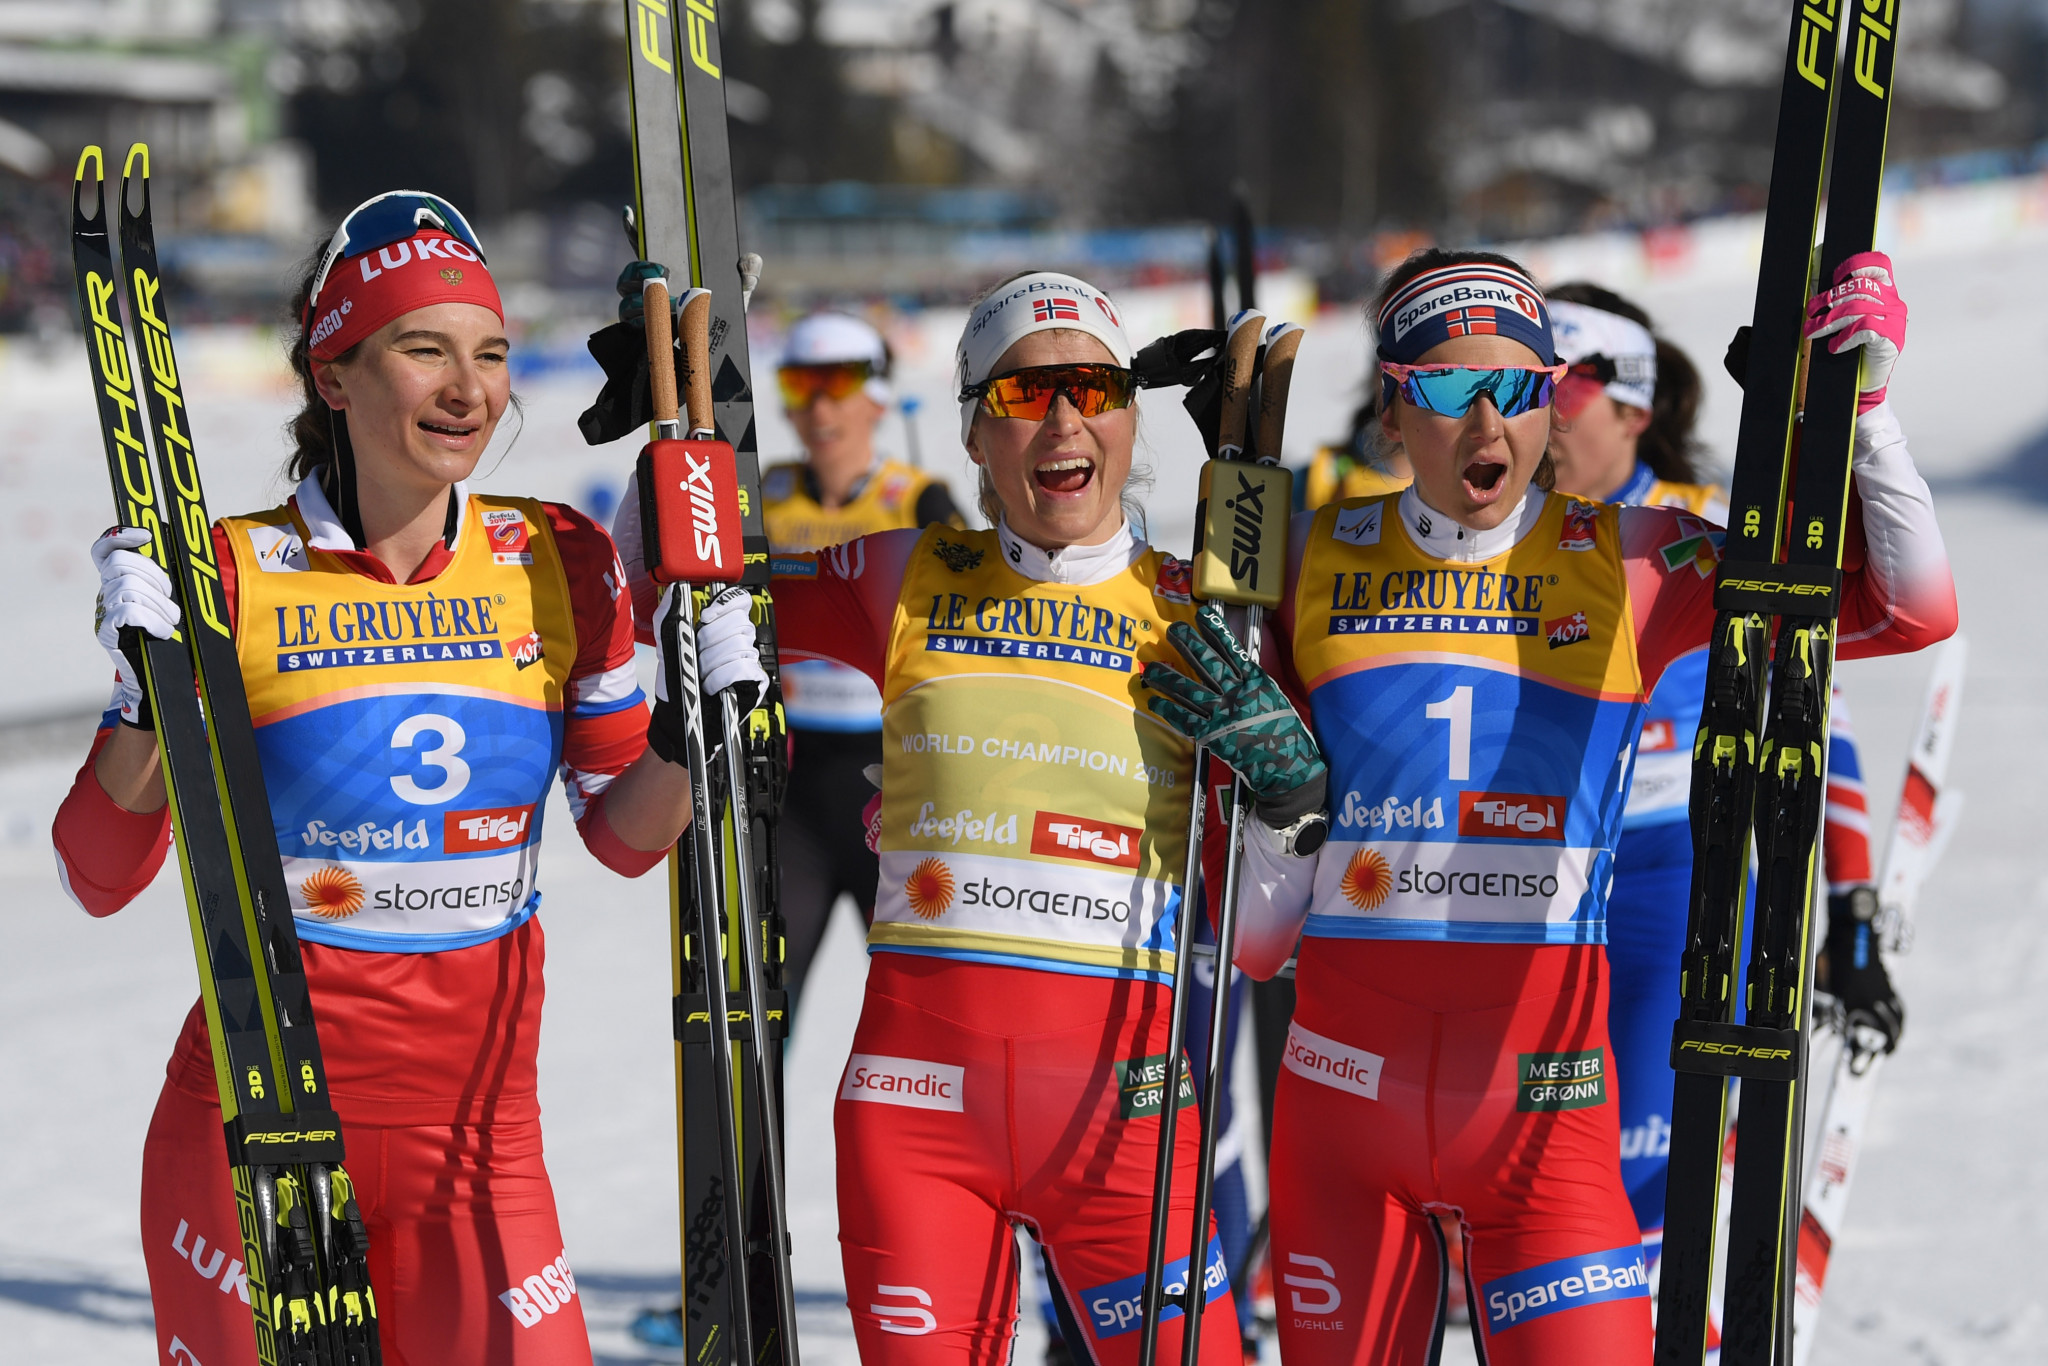 Stora Enso has backed three previous World Championships ©Getty Images